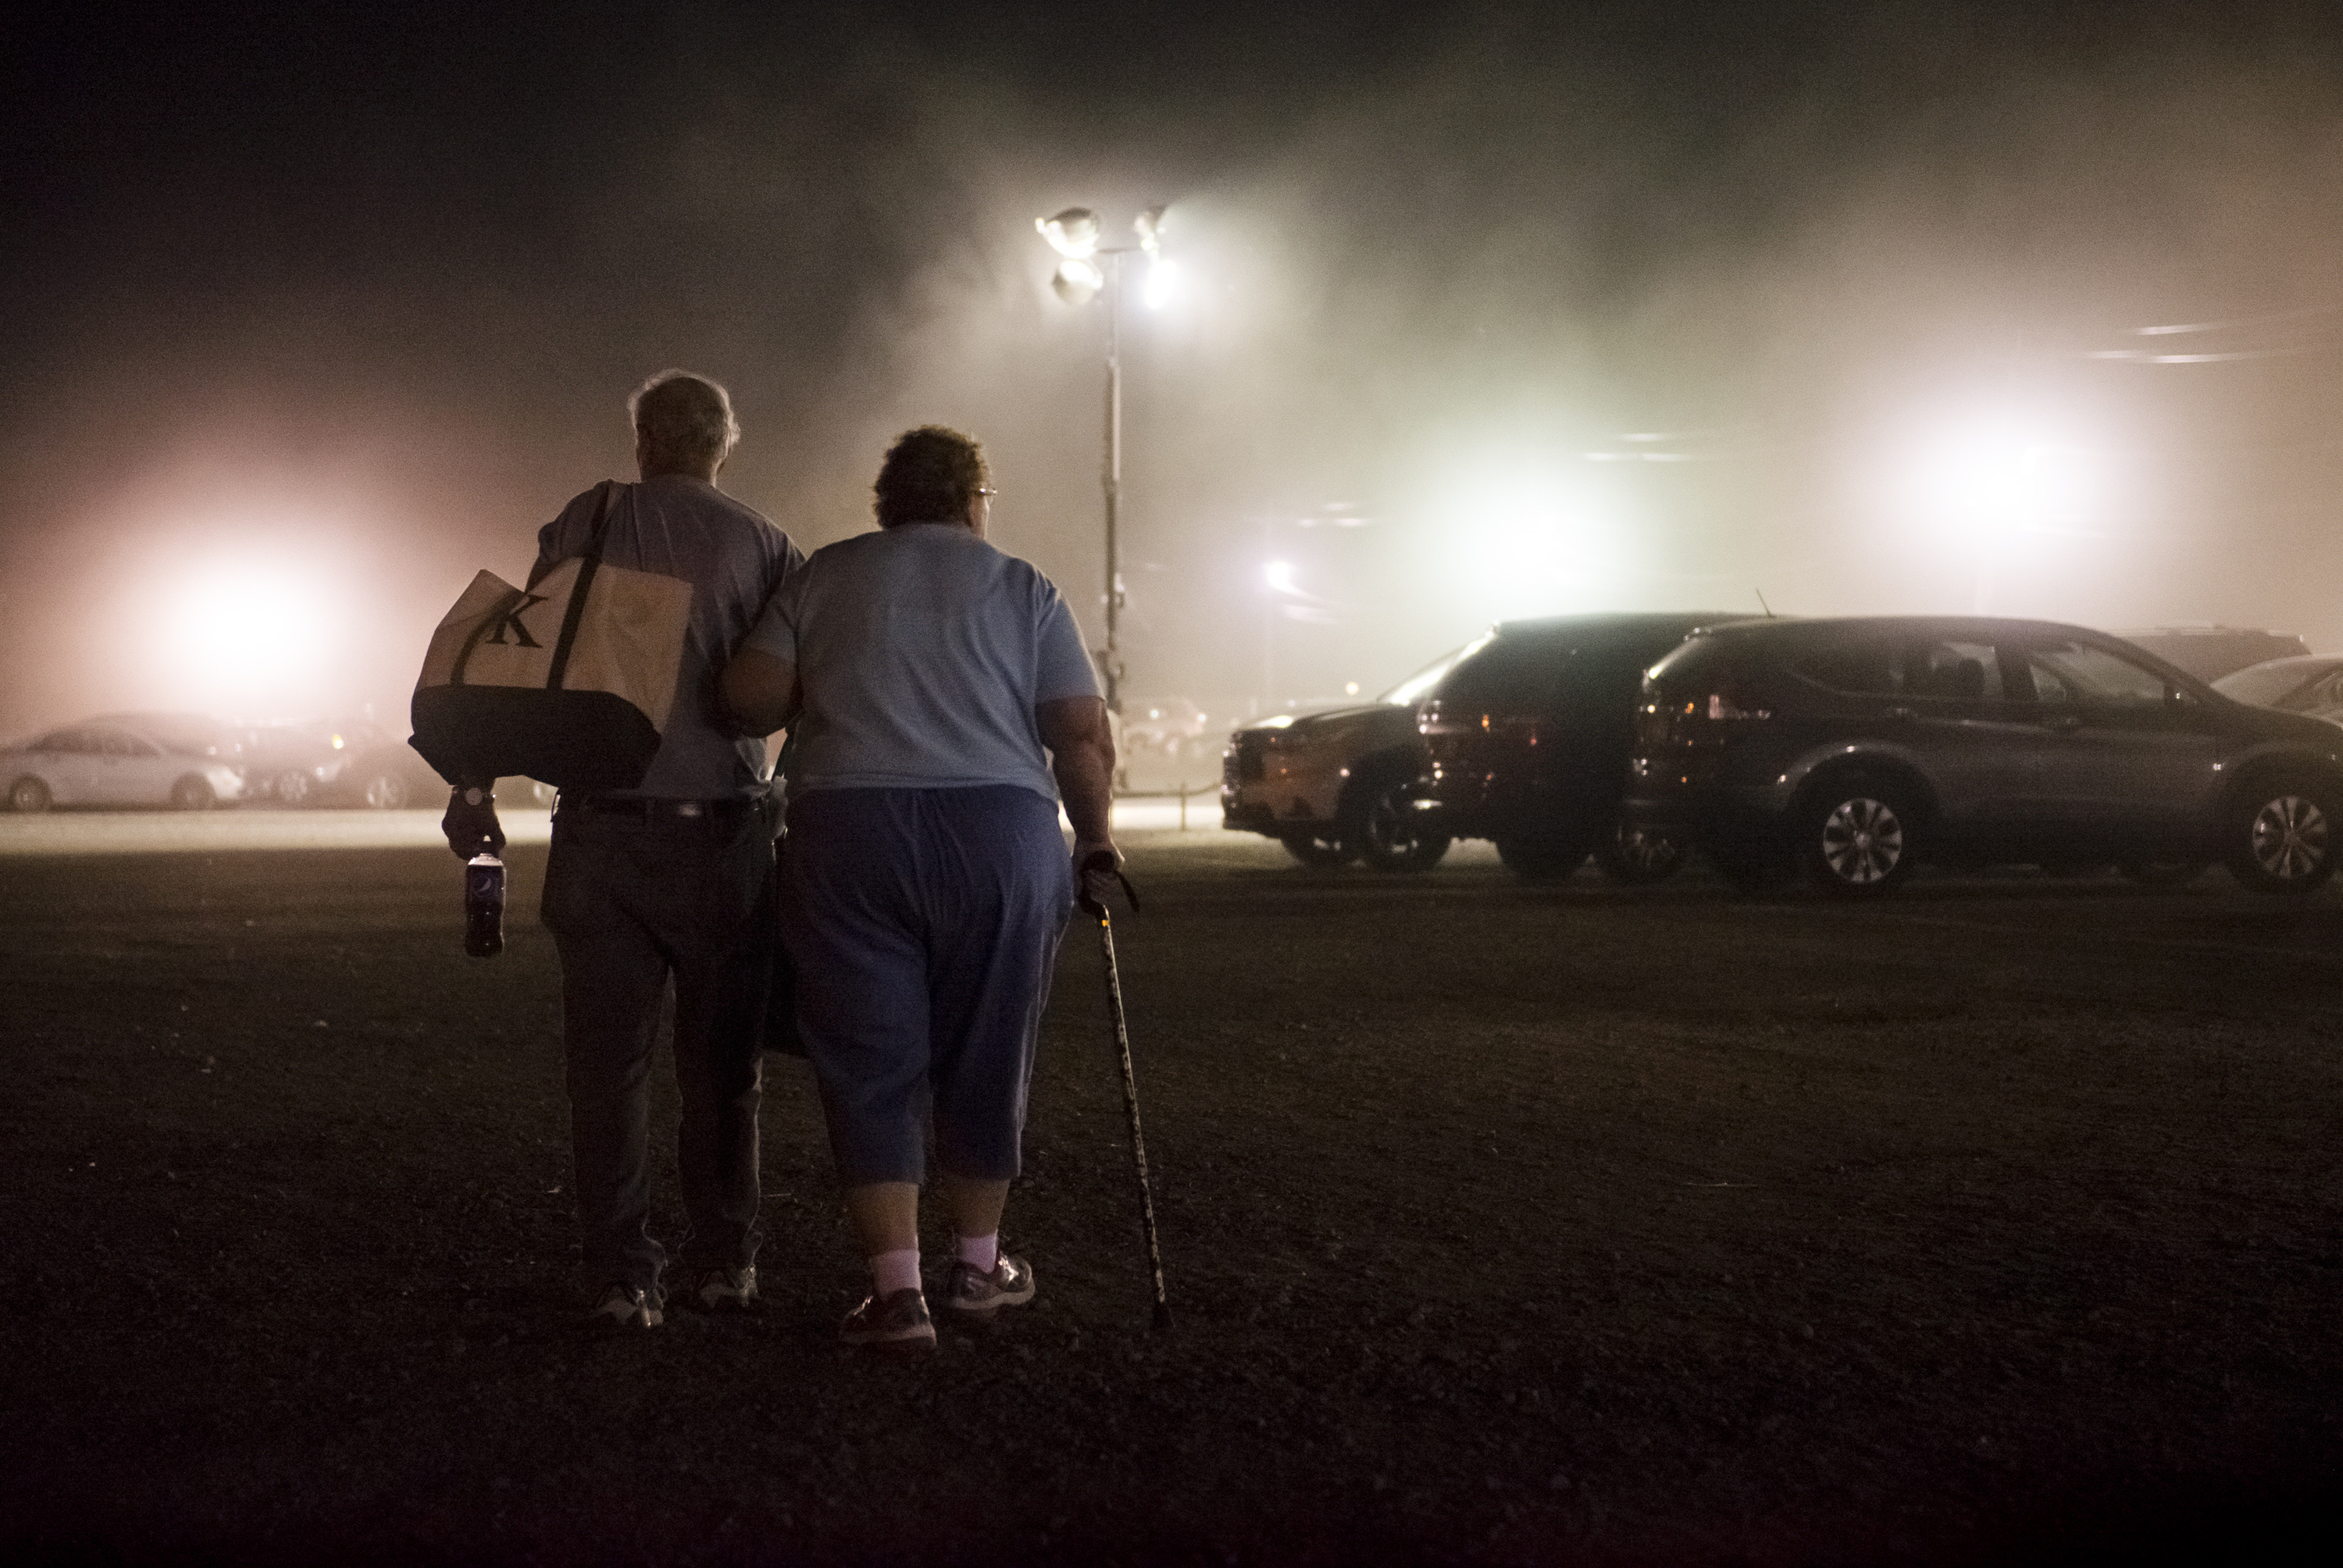 Paul and Susan Kucera, both 75, of Binghamton, N.Y. walk back to their car after spending the day together at the Great New York State Fair, on the New York State Fairgrounds, in Syracuse, N.Y. on Aug. 29, 2016. ÒWe try to come every year" said Mrs. Kucera, "We have been coming since the fair [re]opened after World War TwoÓ. The fair grounds were used as a military base until the war ended, and the fair reopened in 1948. The Great New York State Fair is the largest annual event in New York State, this year attracting just over one million visitors during its 12 days running.